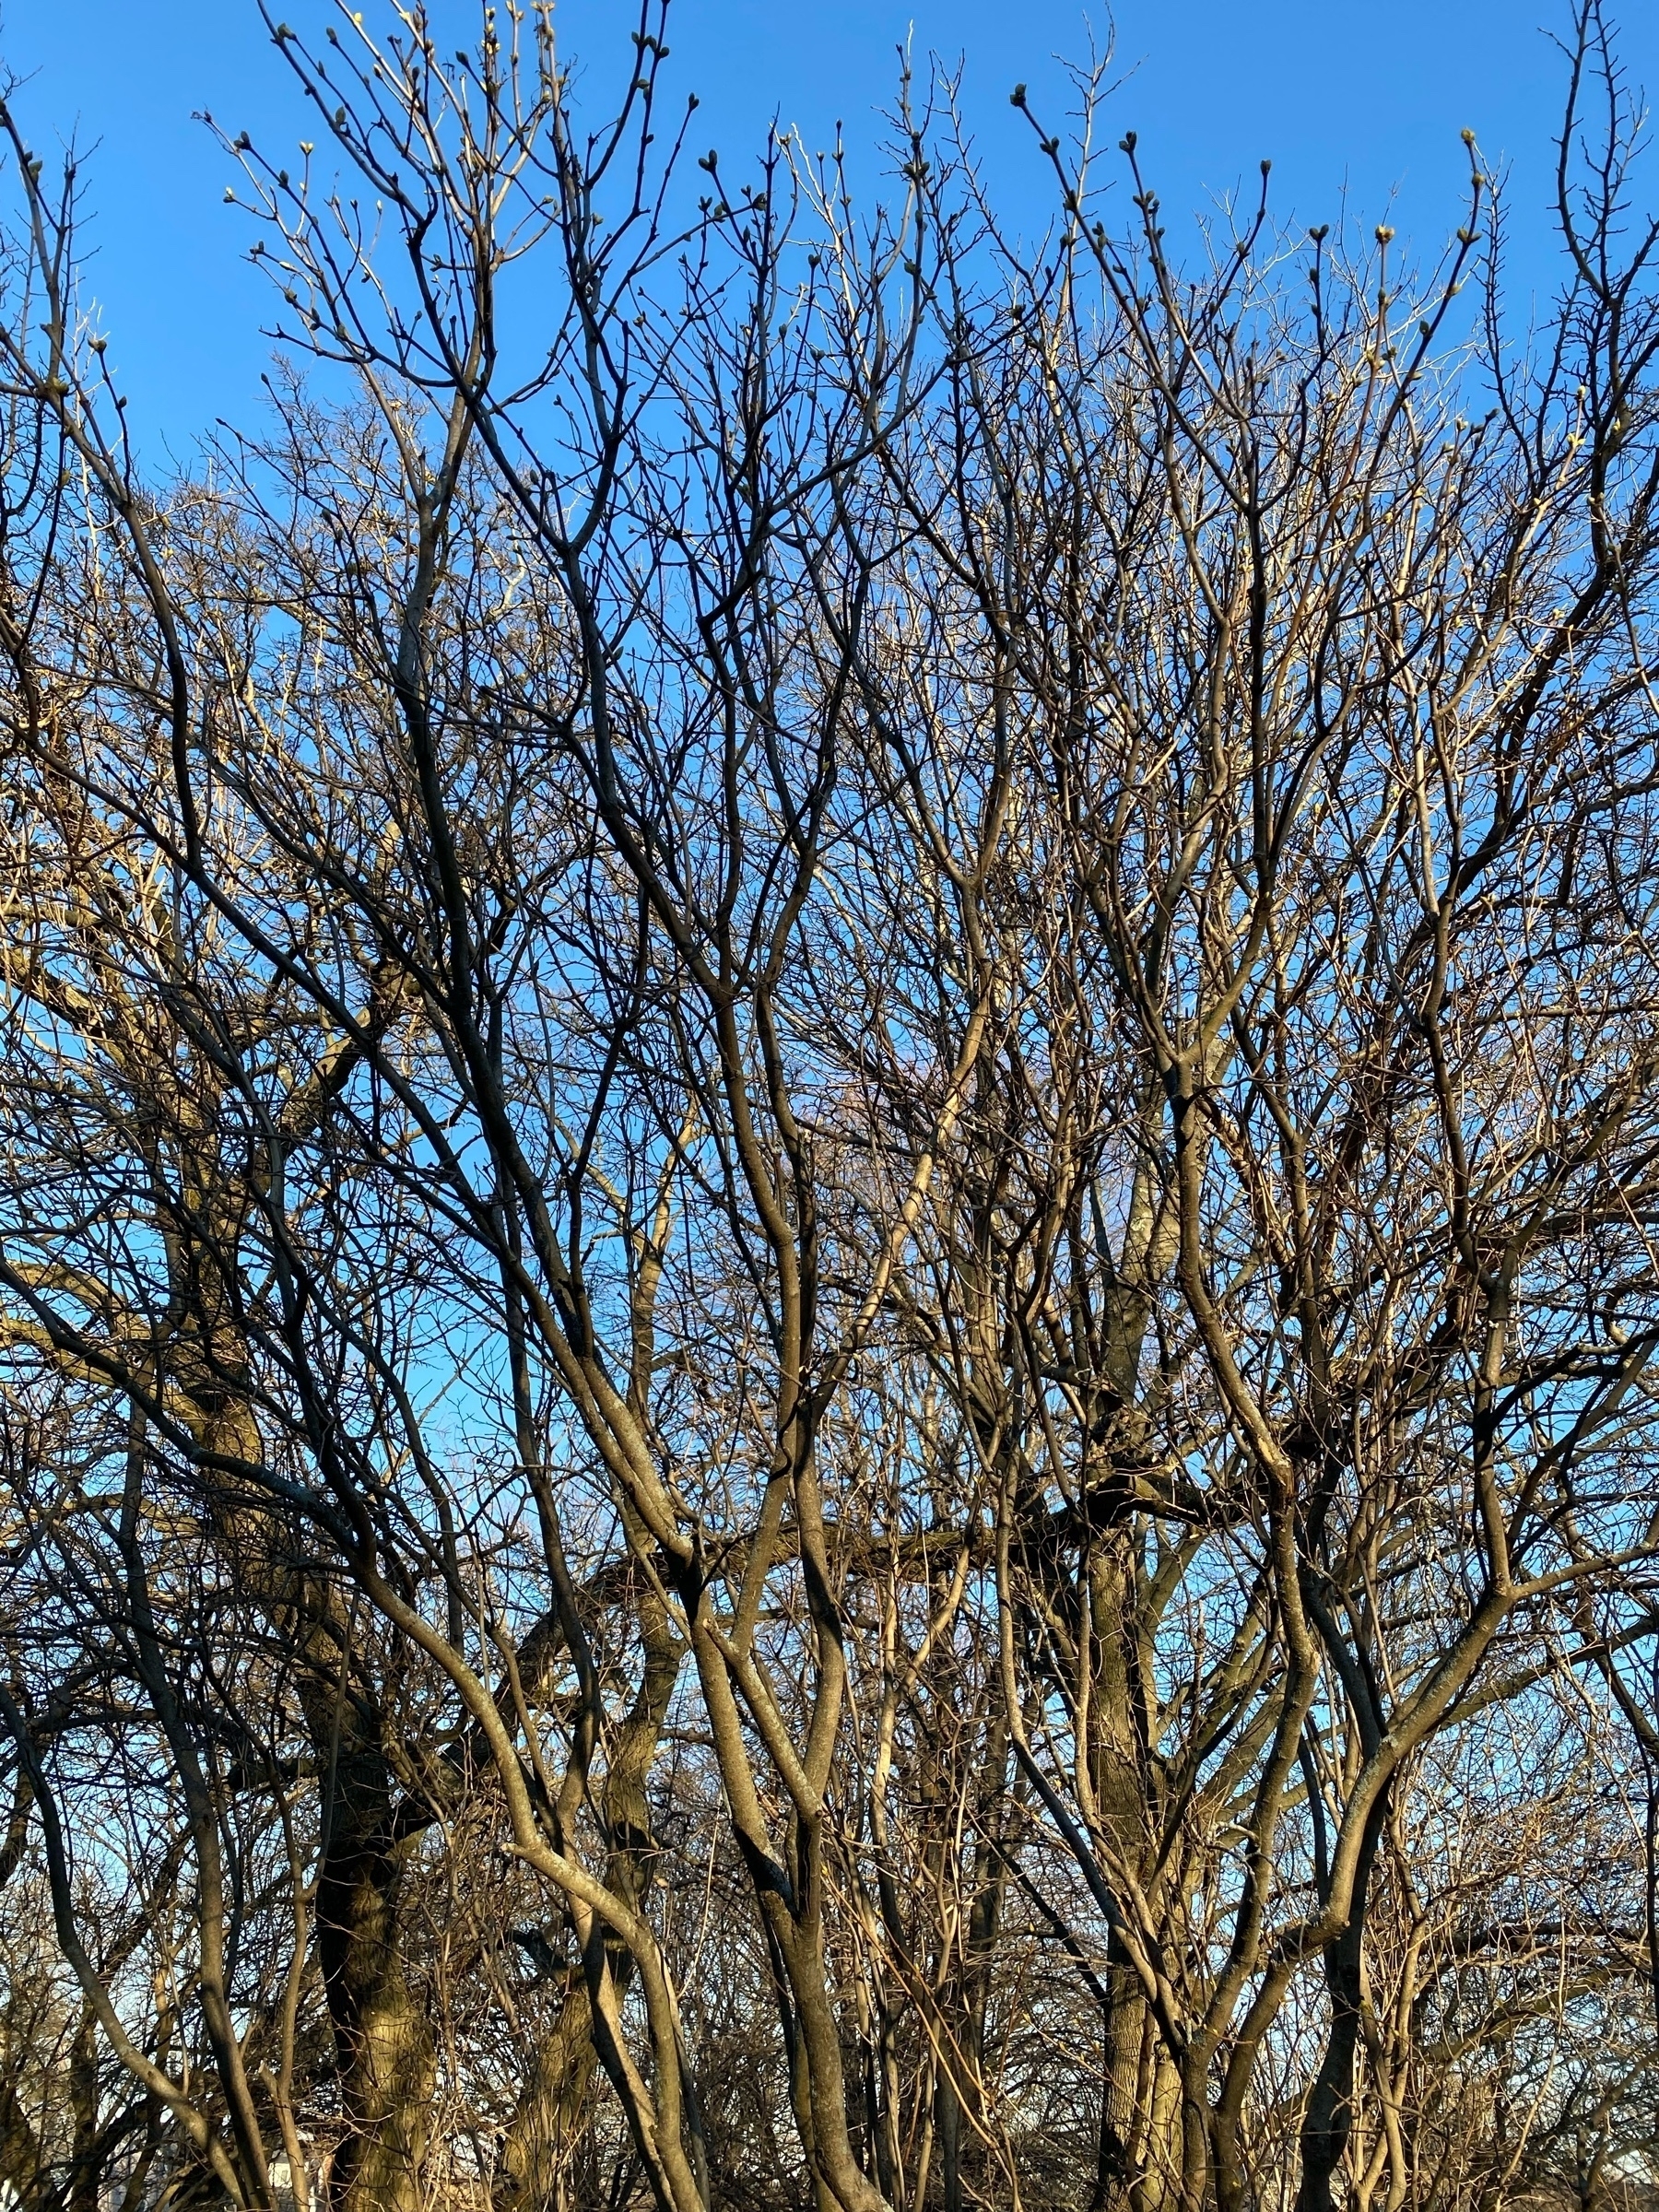 A tangle of bare tree branches against a blue sky.